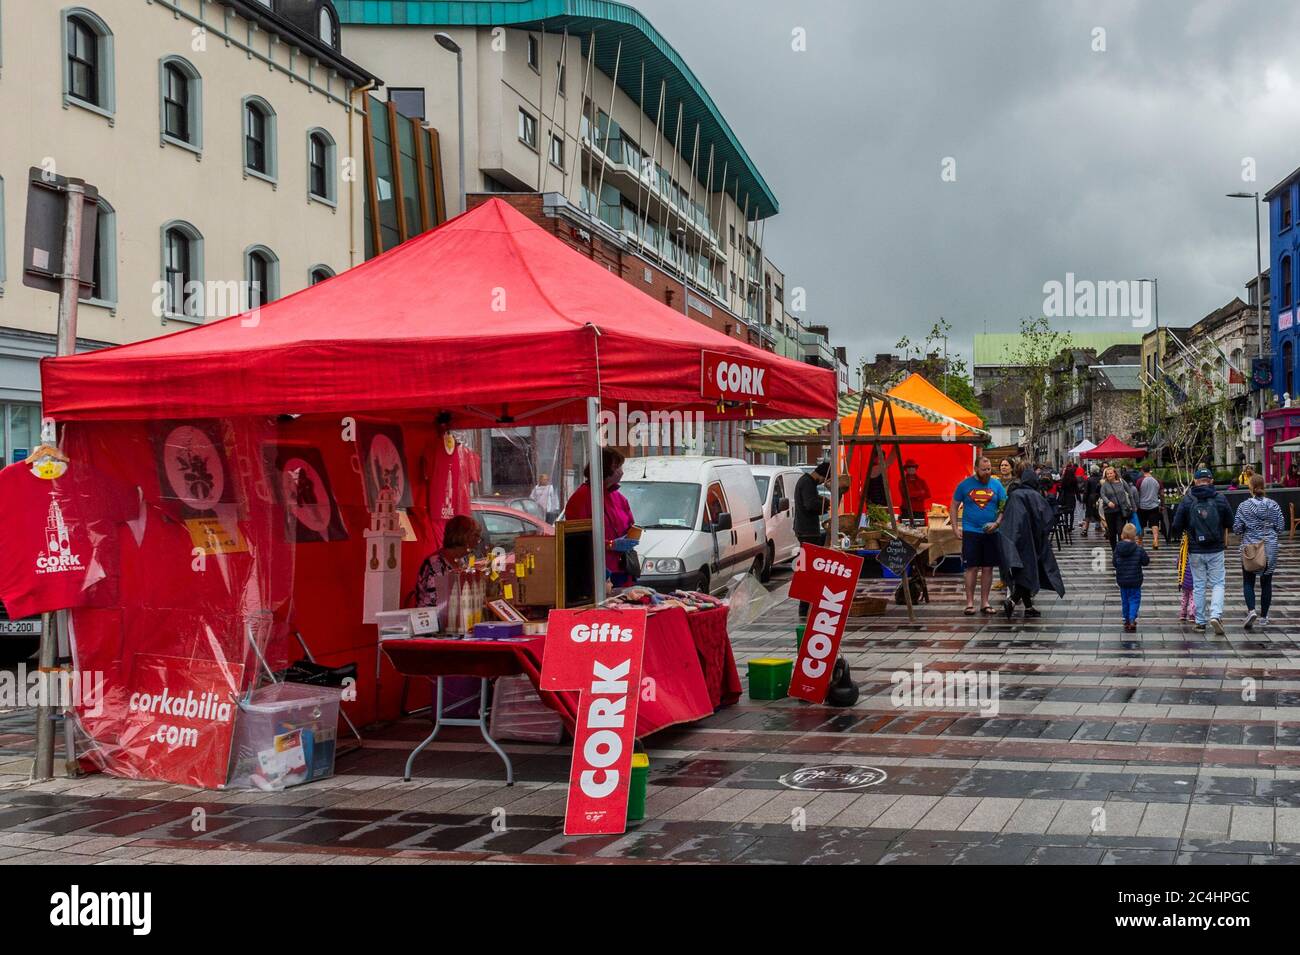 Cork, Ireland. 27th June, 2020. Cork City was busy with shoppers today, as things get back to a new normal after the Coronavirus lockdown. The Saturday Market on Coal Quay was very busy. Credit: AG News/Alamy Live News Stock Photo